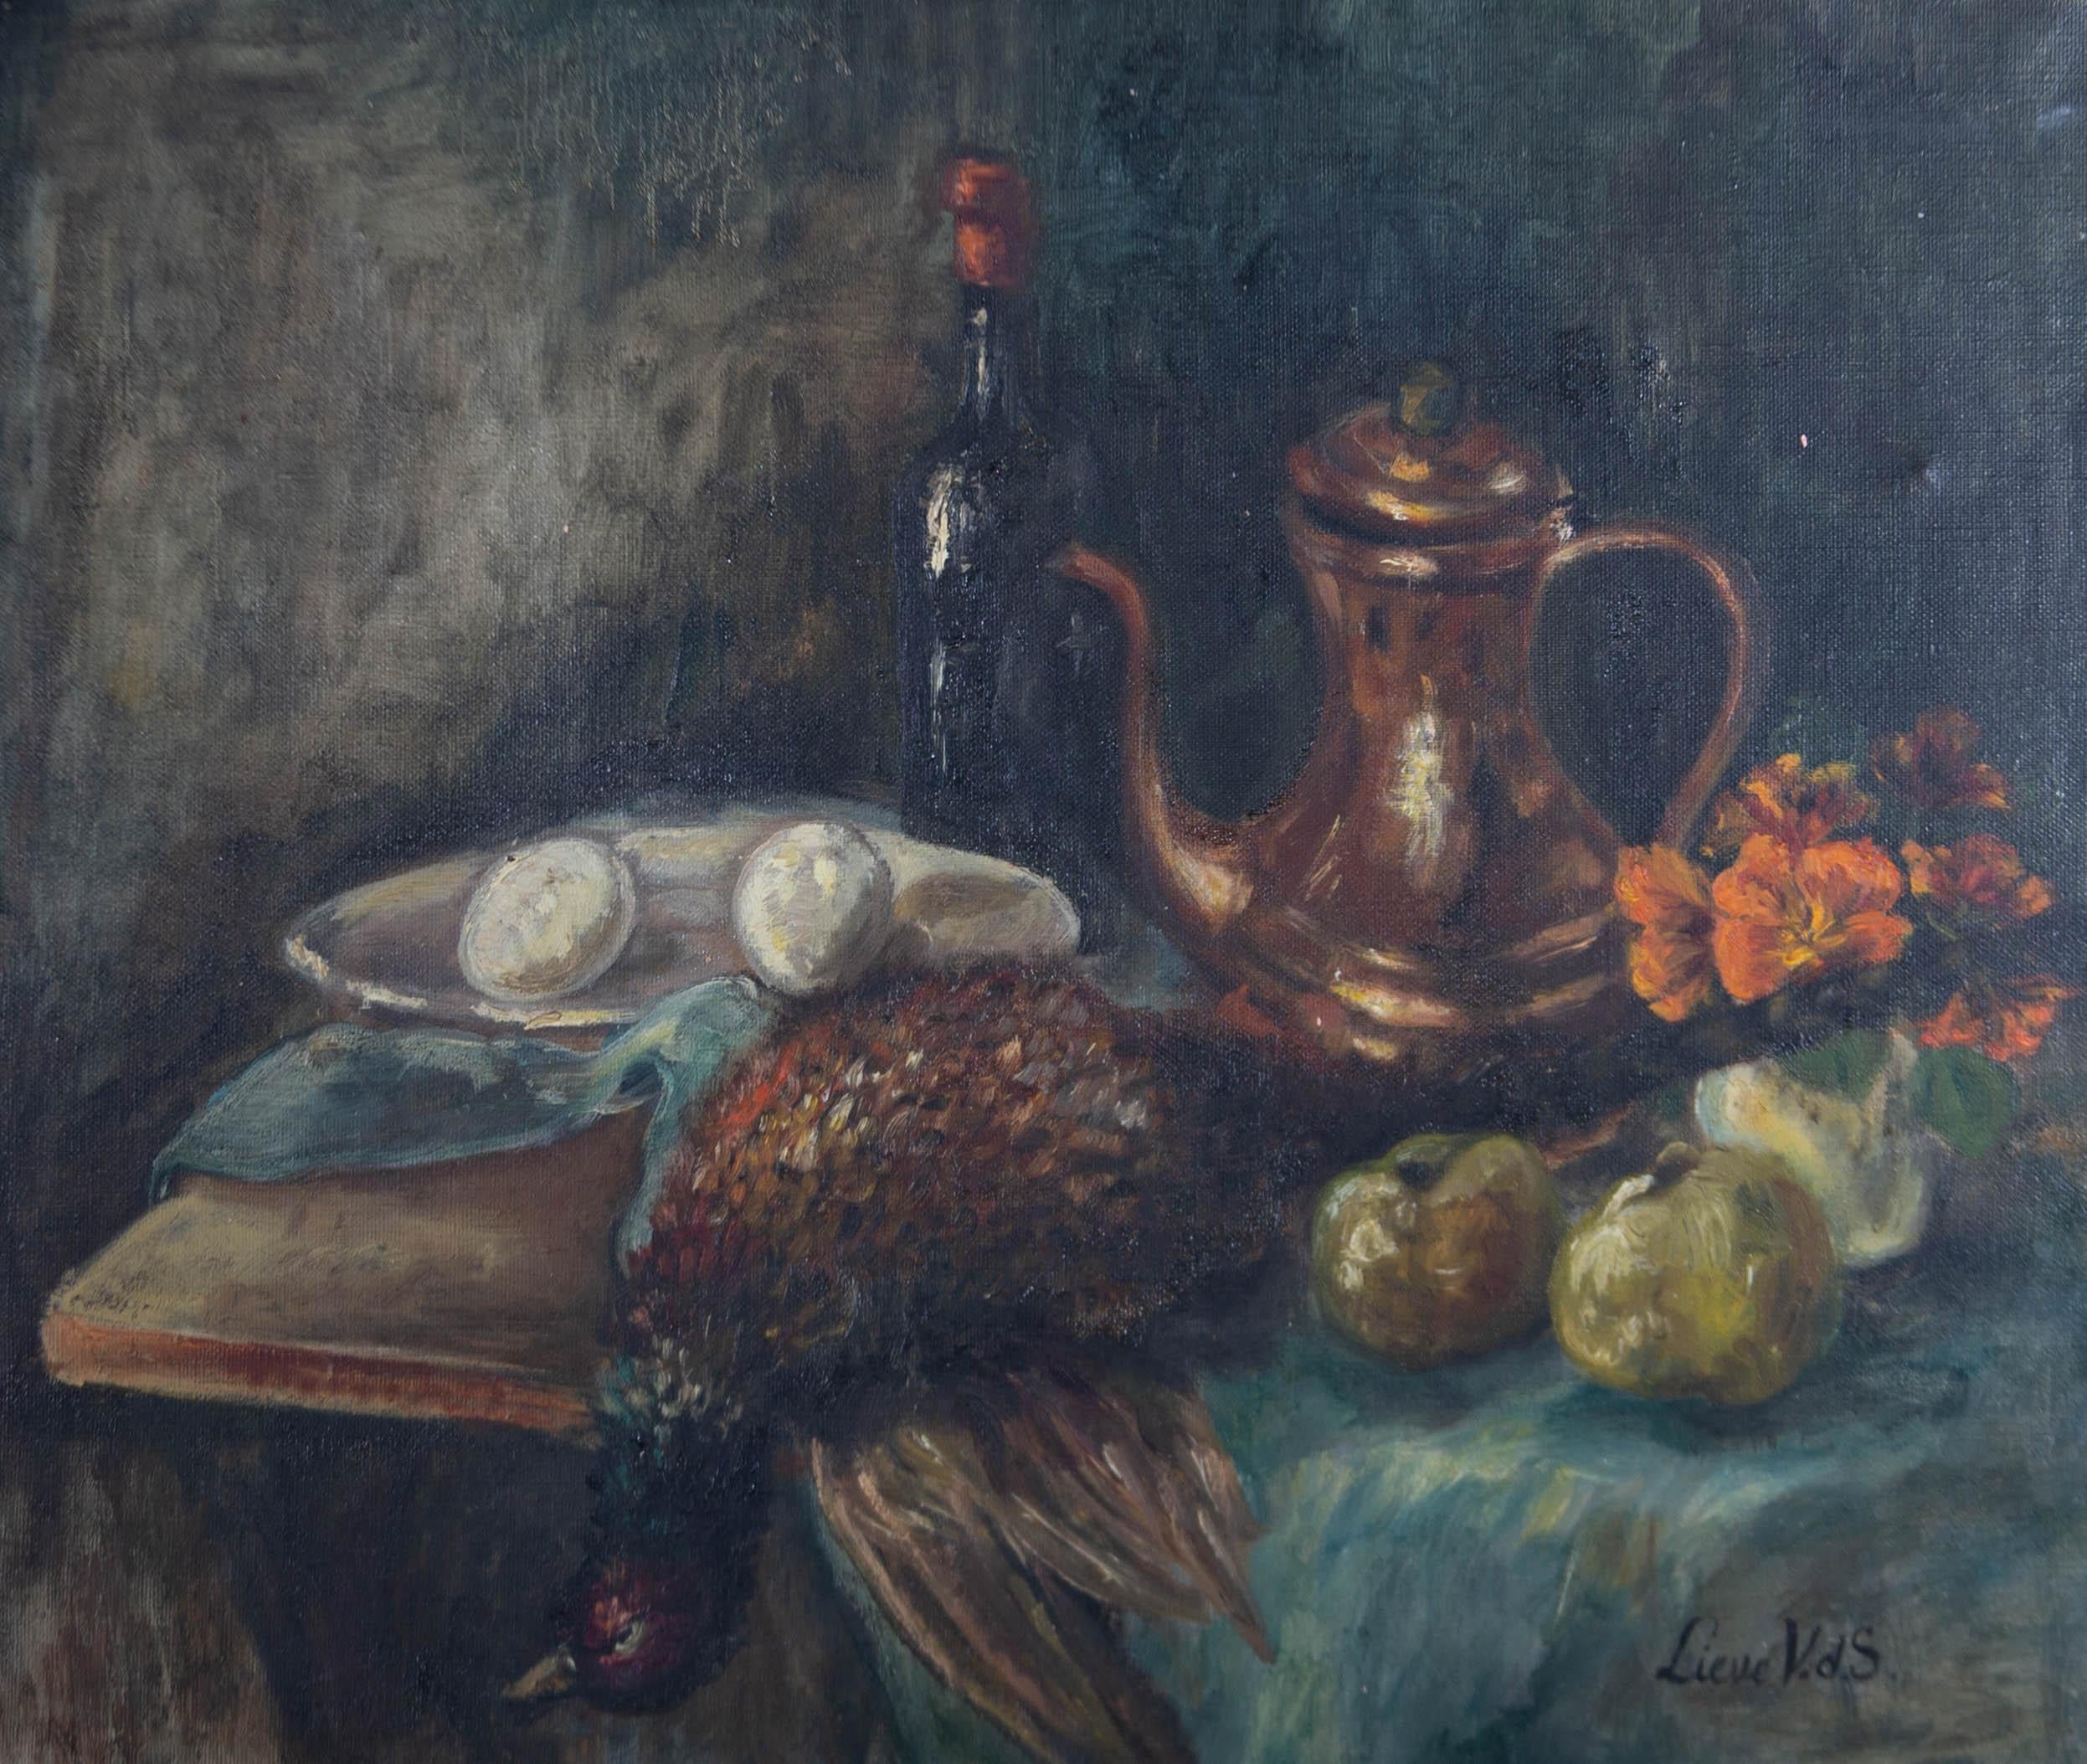 A charmingly rustic still life showing a table with two eggs on a plate, a pair of apples, coffee pot, bottle of red wine and a small vase of nasturtiums. The artist has used a textured brush technique with a muted naturalistic palette which gives